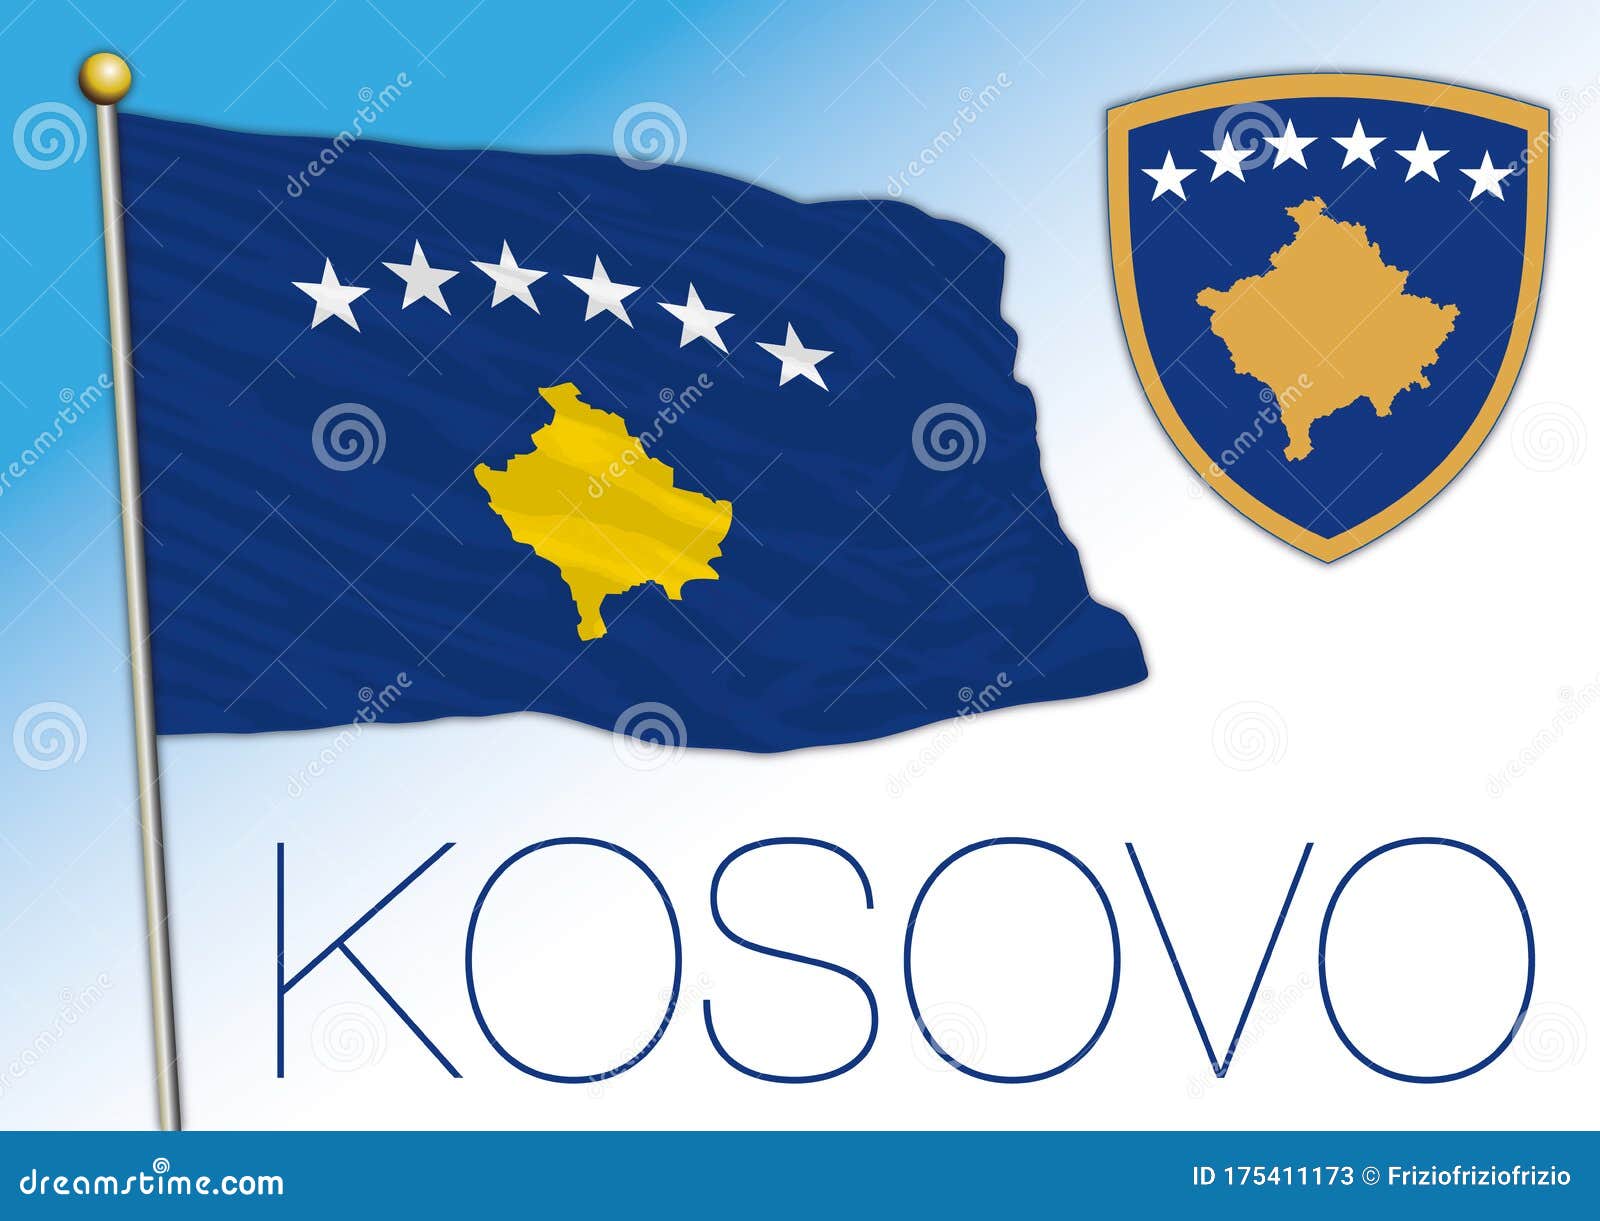 Free Vector  Kosovo flag and national emblems collection